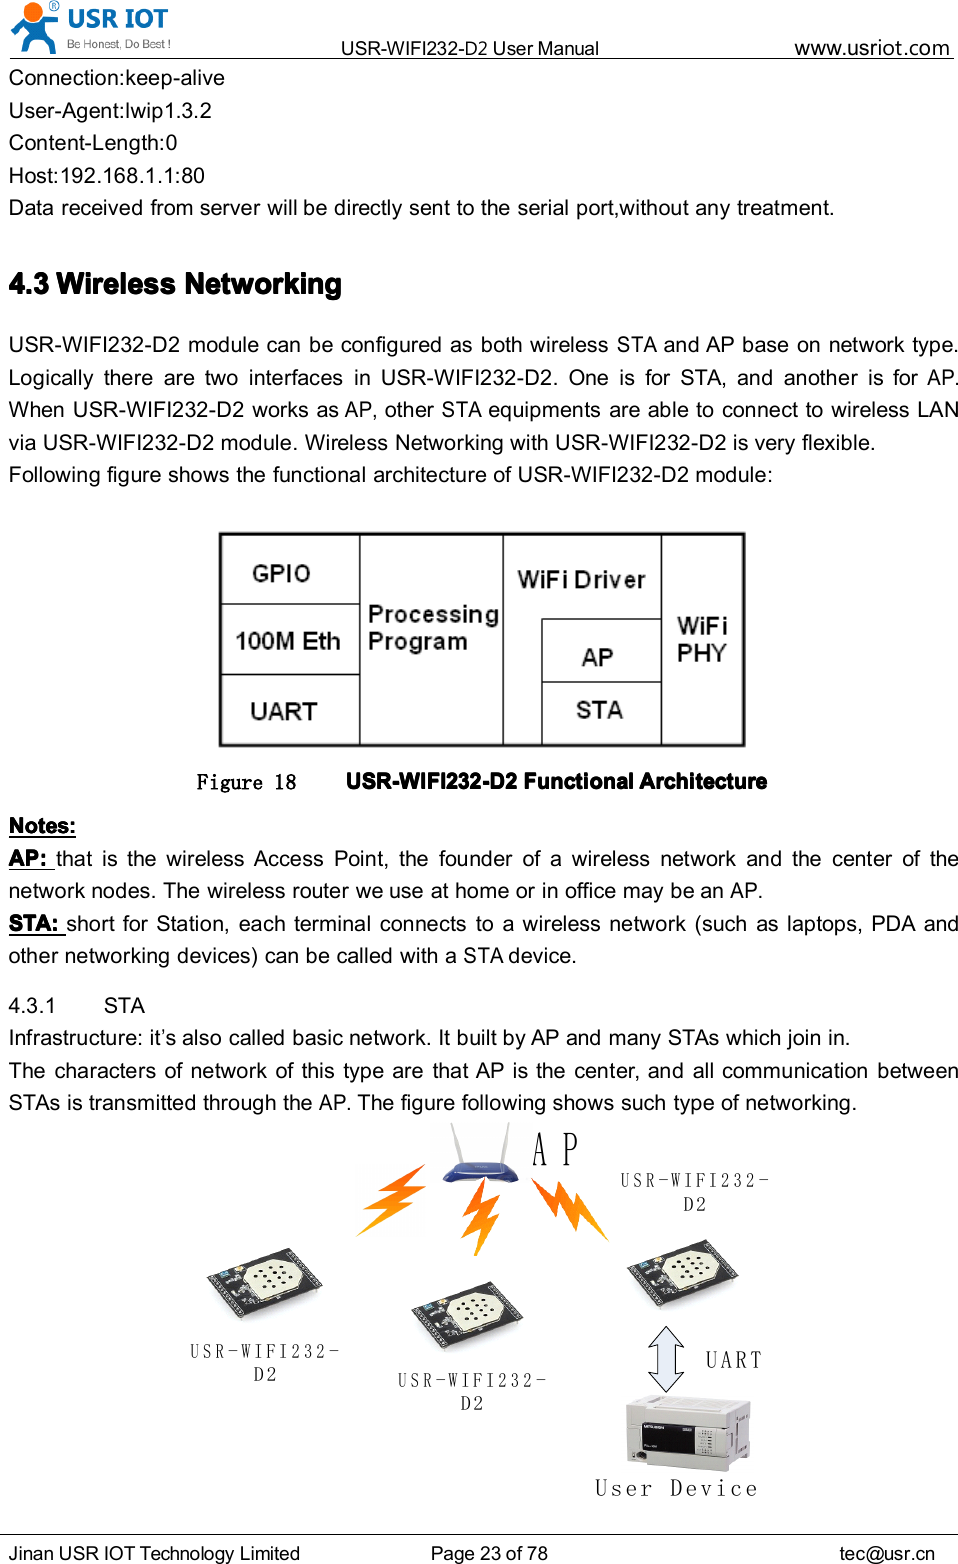 USR-WIFI232- D2 User Manual www.usr iot .comJinan USR IOT Technology Limited Page 23 of 78 tec@usr.cnConnection:keep-aliveUser-Agent:lwip1.3.2Content-Length:0Host:192.168.1.1:80Data received from server will be directly sent to the serial port,without any treatment.4.34.34.34.3 WirelessWirelessWirelessWireless NetworkingNetworkingNetworkingNetworkingUSR-WIFI232-D2 module can be configured as both wirelessSTAand AP base on network type.Logically there are two interfaces in USR-WIFI232-D2 . One is for STA, and another is forAP.When USR-WIFI232-D2 works asAP,otherSTAequipments are able to connect to wireless LANvia USR-WIFI232-D2 module. Wireless Networking with USR-WIFI232-D2 is very flexible.Following figure shows the functional architecture of USR-WIFI232-D2 module:Figure 18 USR-WIFI232-D2USR-WIFI232-D2USR-WIFI232-D2USR-WIFI232-D2 FunctionalFunctionalFunctionalFunctional ArchitectureArchitectureArchitectureArchitectureNotes:Notes:Notes:Notes:AP:AP:AP:AP: that is the wireless Access Point, the founder of a wireless network and the cent er of thenetwork nodes. The wireless router we use at home or in office may be anAP.STA:STA:STA:STA: short for Station, each terminal connects to a wireless network (such as laptops, PDA andother networking devices) can be called with aSTAdevice.4.3.1 STAInfrastructure: it’s also called basic network. It built by AP and many STAs which join in.The characters of network of this type are that AP is the cent er , and all communication betweenSTAs is transmitted through theAP.The figure following shows such type of networking.APUSR-WIFI232-D 2USR-WIFI232-D 2USR-WIFI232-D 2UARTUser Device